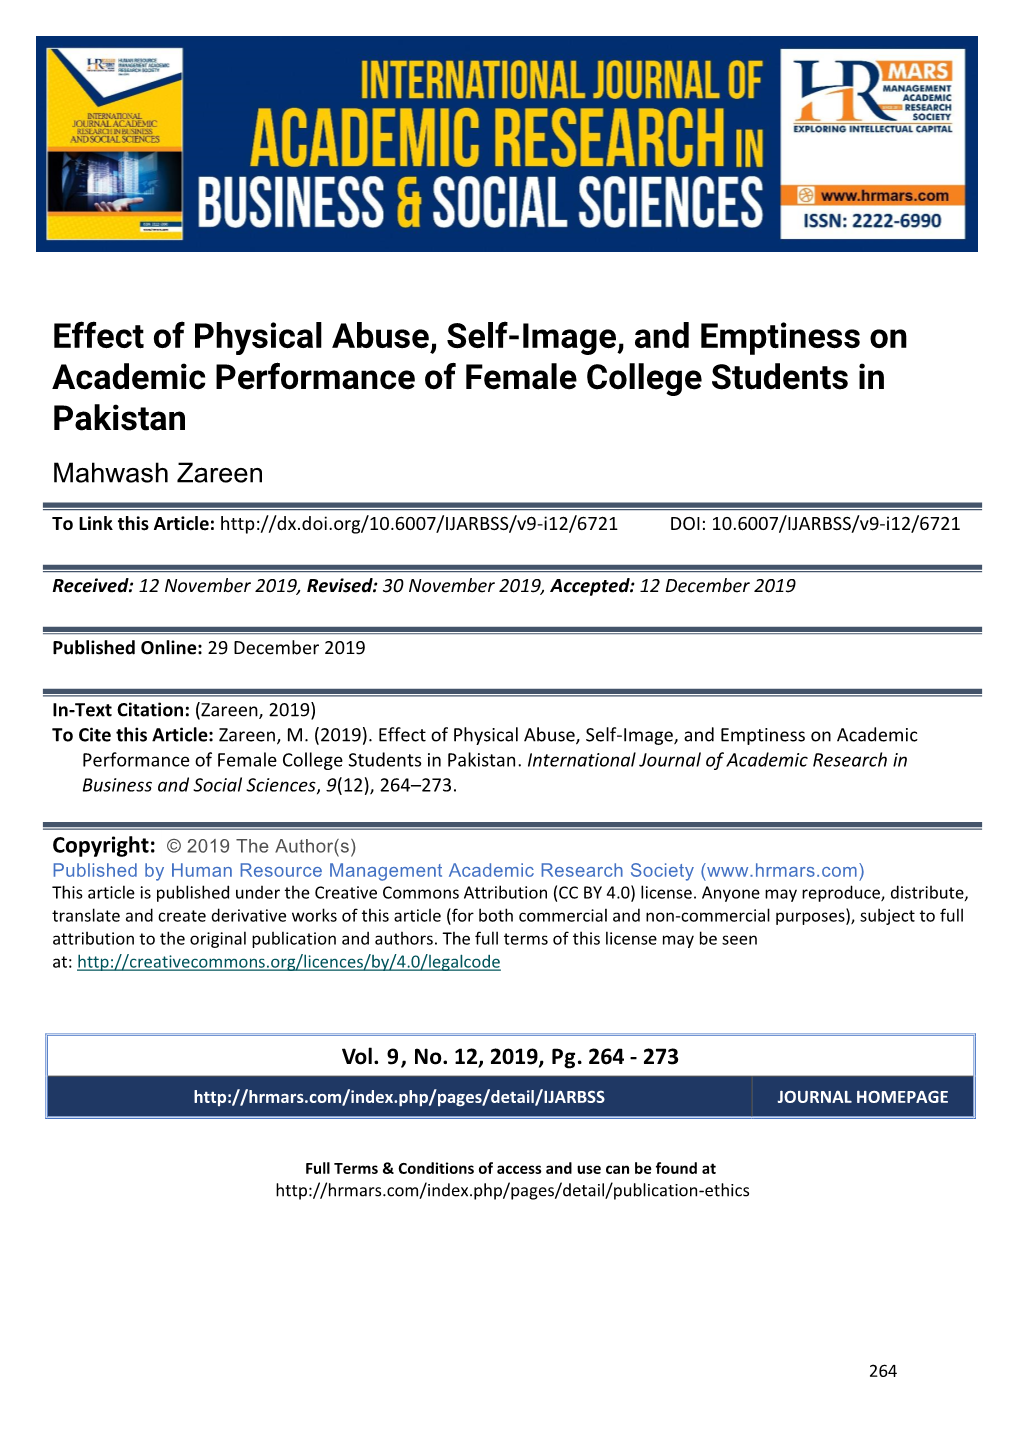 Effect of Physical Abuse, Self-Image, and Emptiness on Academic Performance of Female College Students in Pakistan